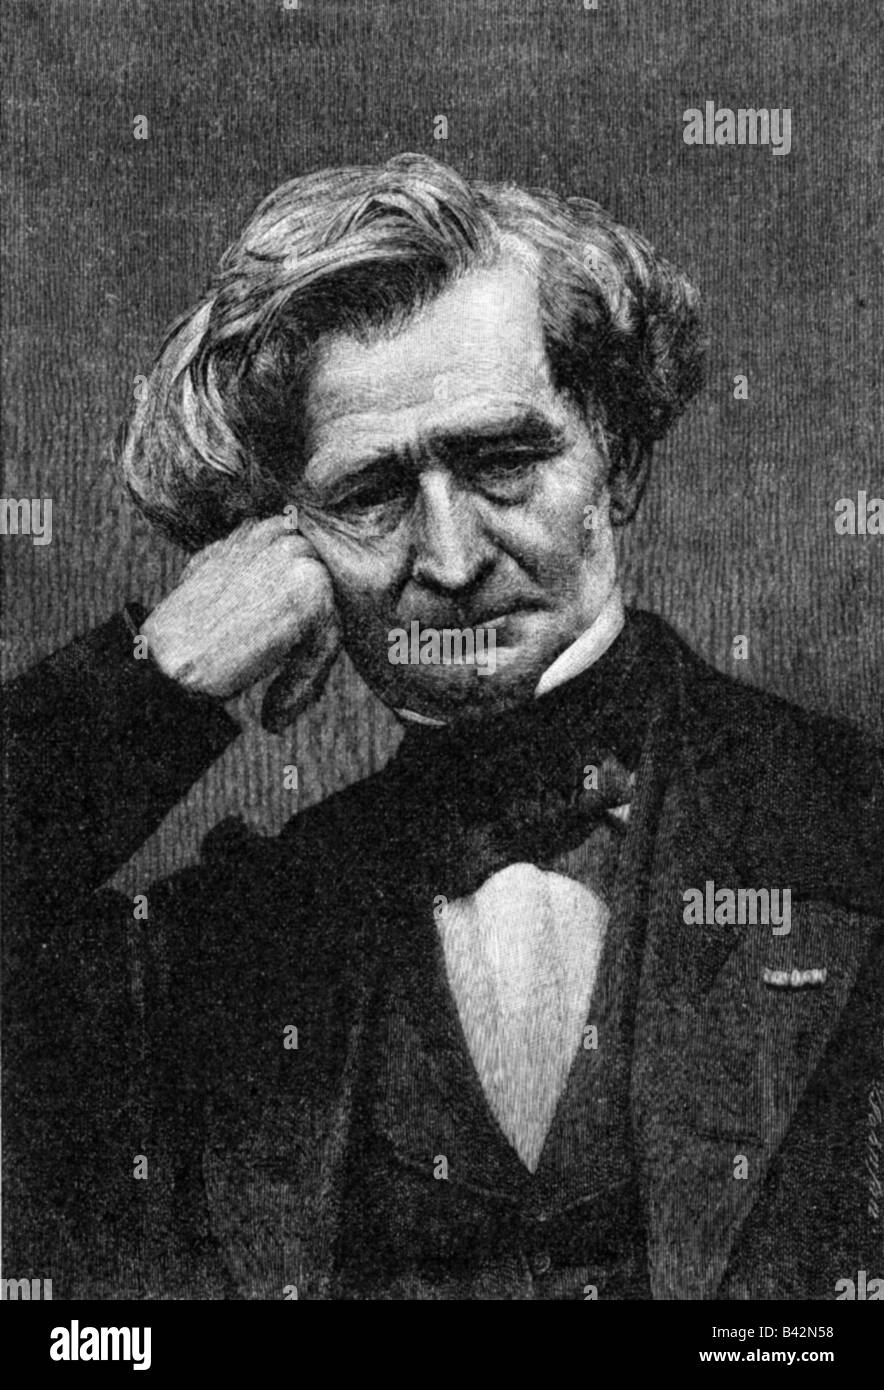 Berlioz, Hector Louis, 11.12.1803 - 8.3.1869, French composer, portrait, engraving, 19th century, Stock Photo